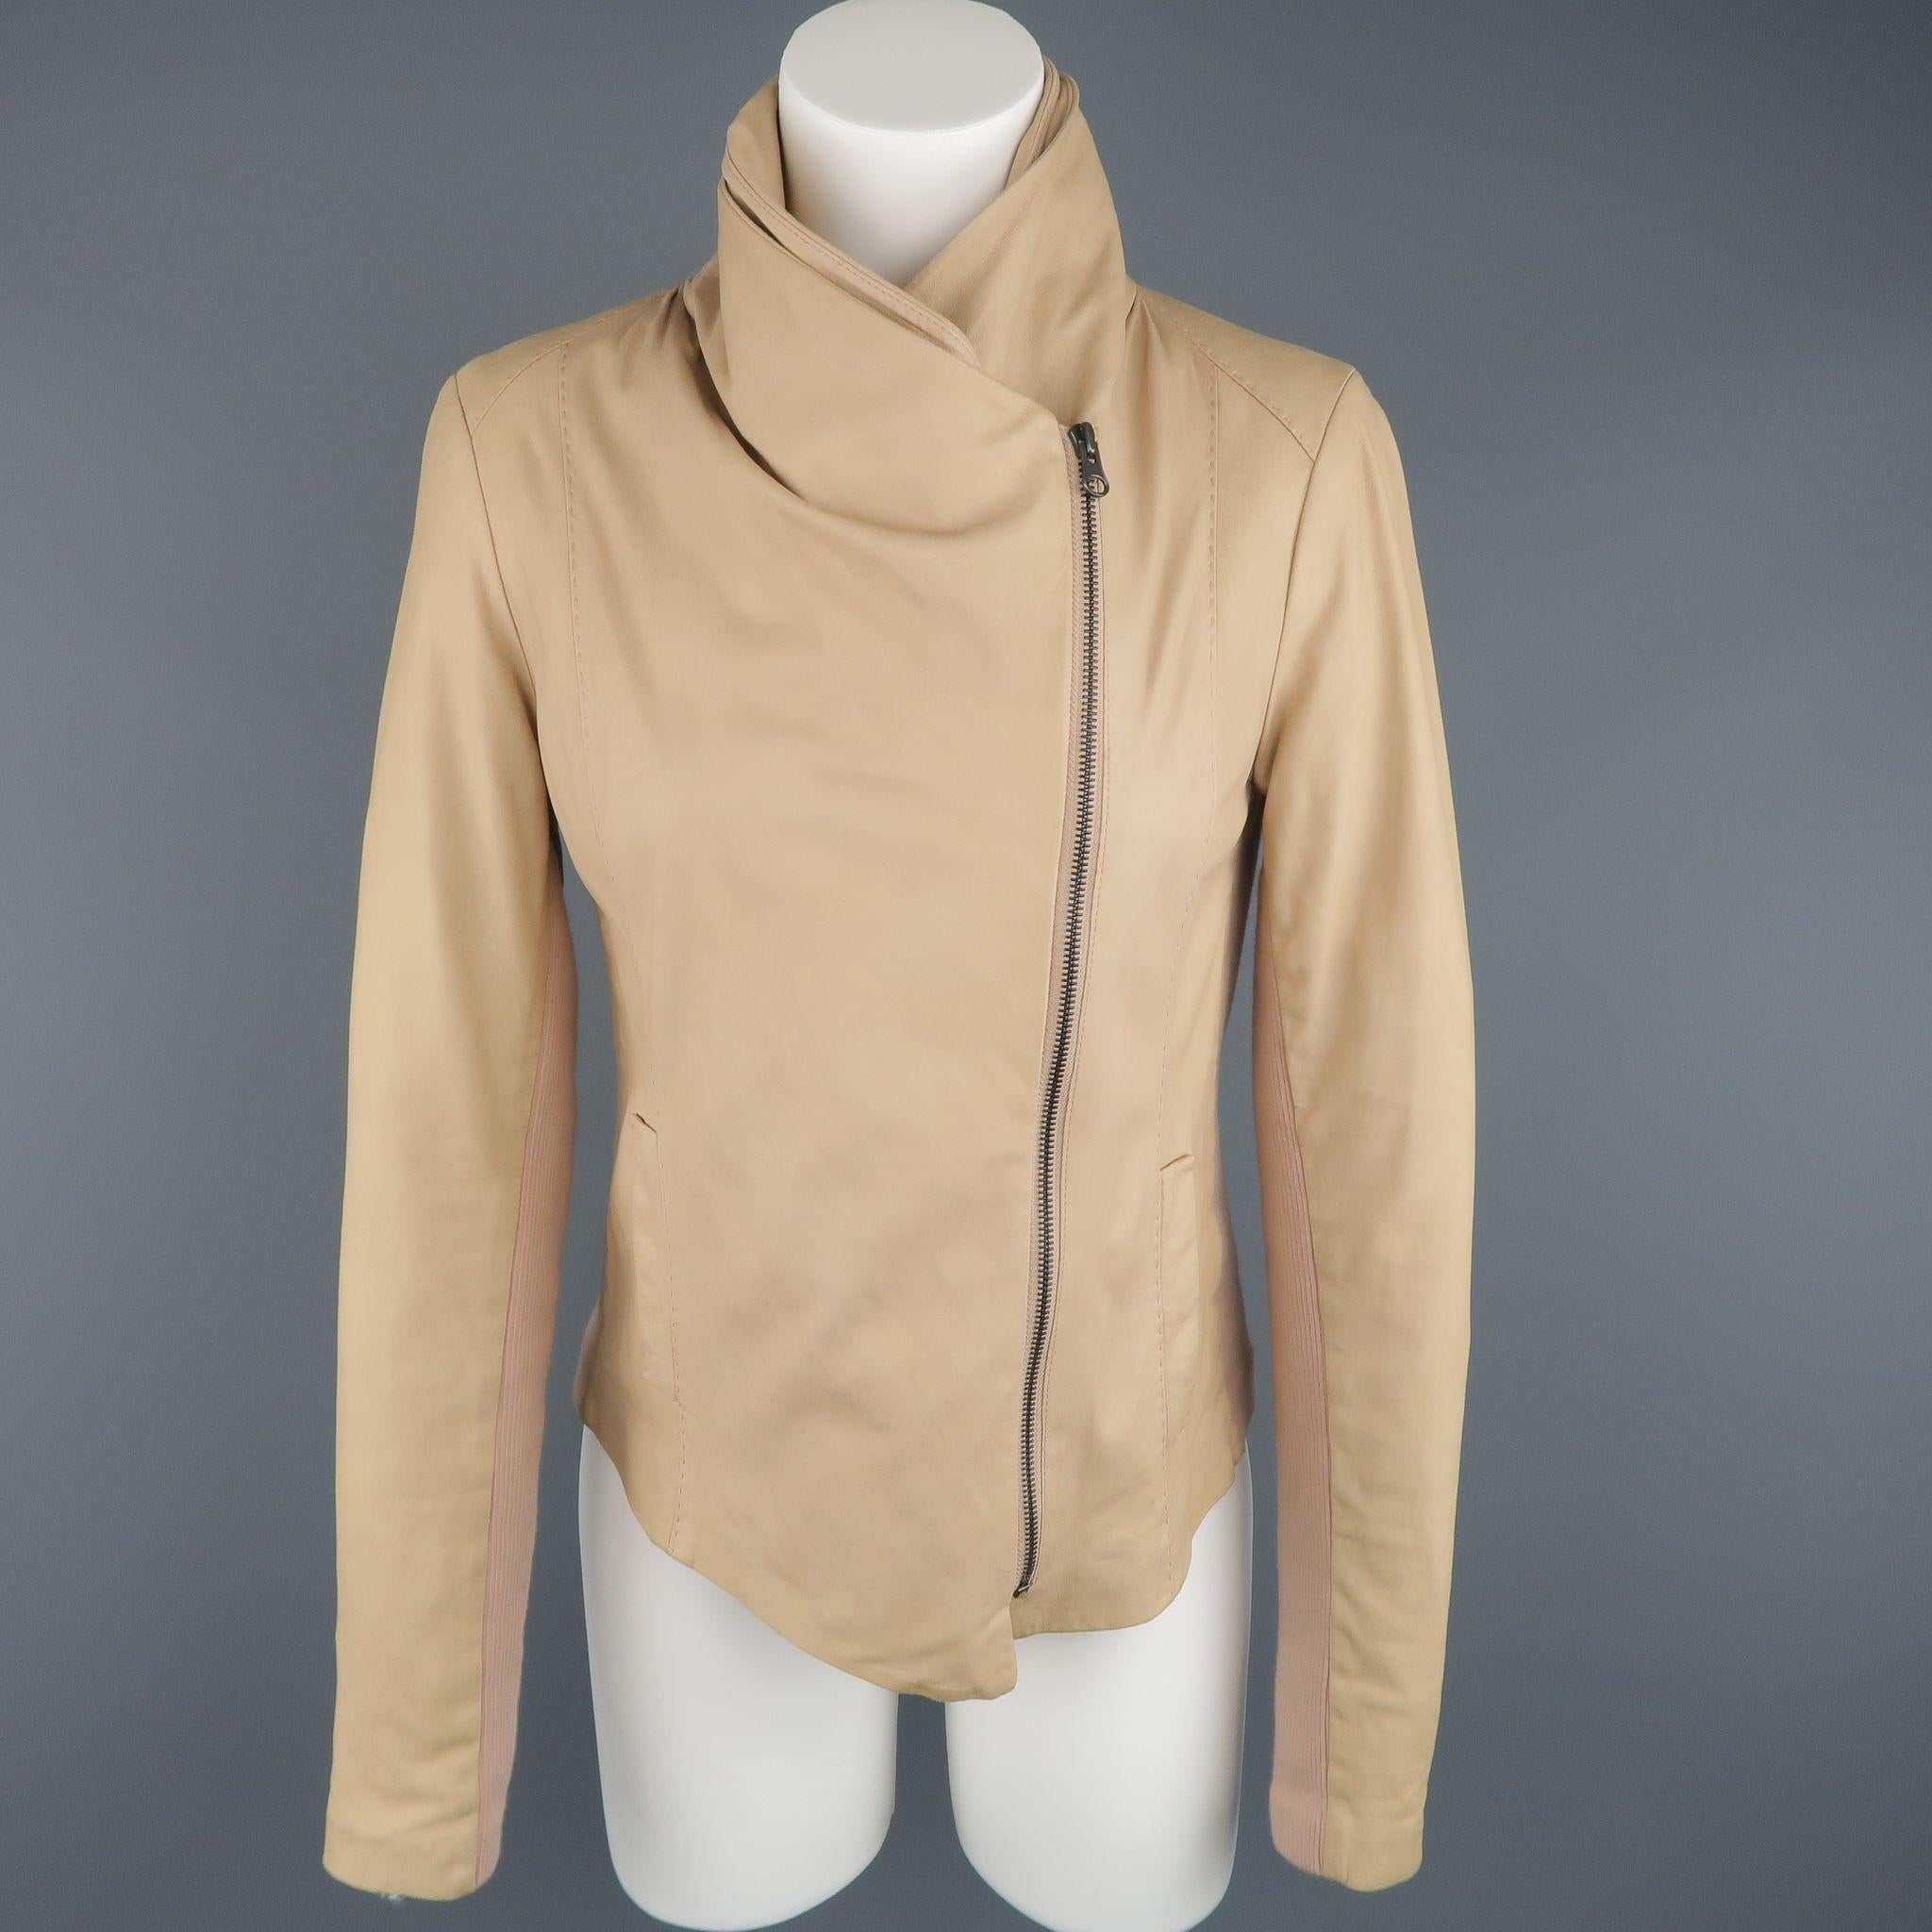 VINCE avant garde biker jacket comes in a light weight beige matte leather and features a draped collar, asymmetrical zip front, slit pockets, peachy beige ribbed panels, and top stitching throughout.  Retailed @ $995.00
 
Good Pre-Owned